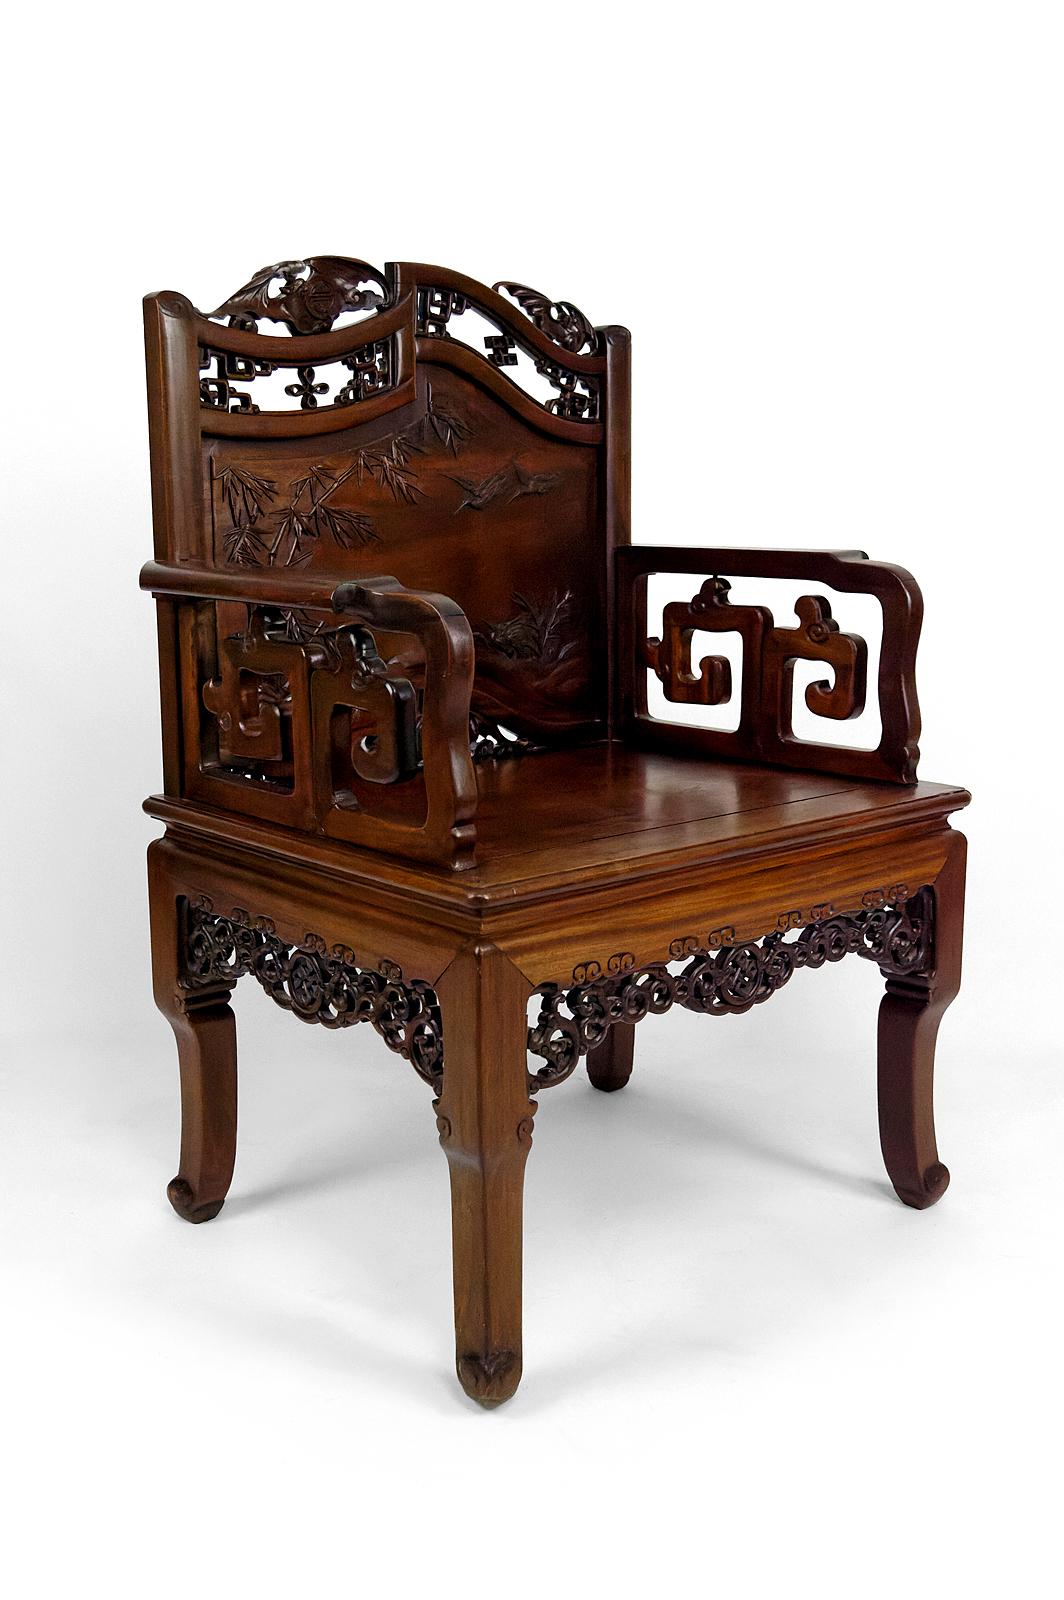 Set of 4 important Asian armchairs with Bats and Cranes, Indochina, Circa 1880 For Sale 1